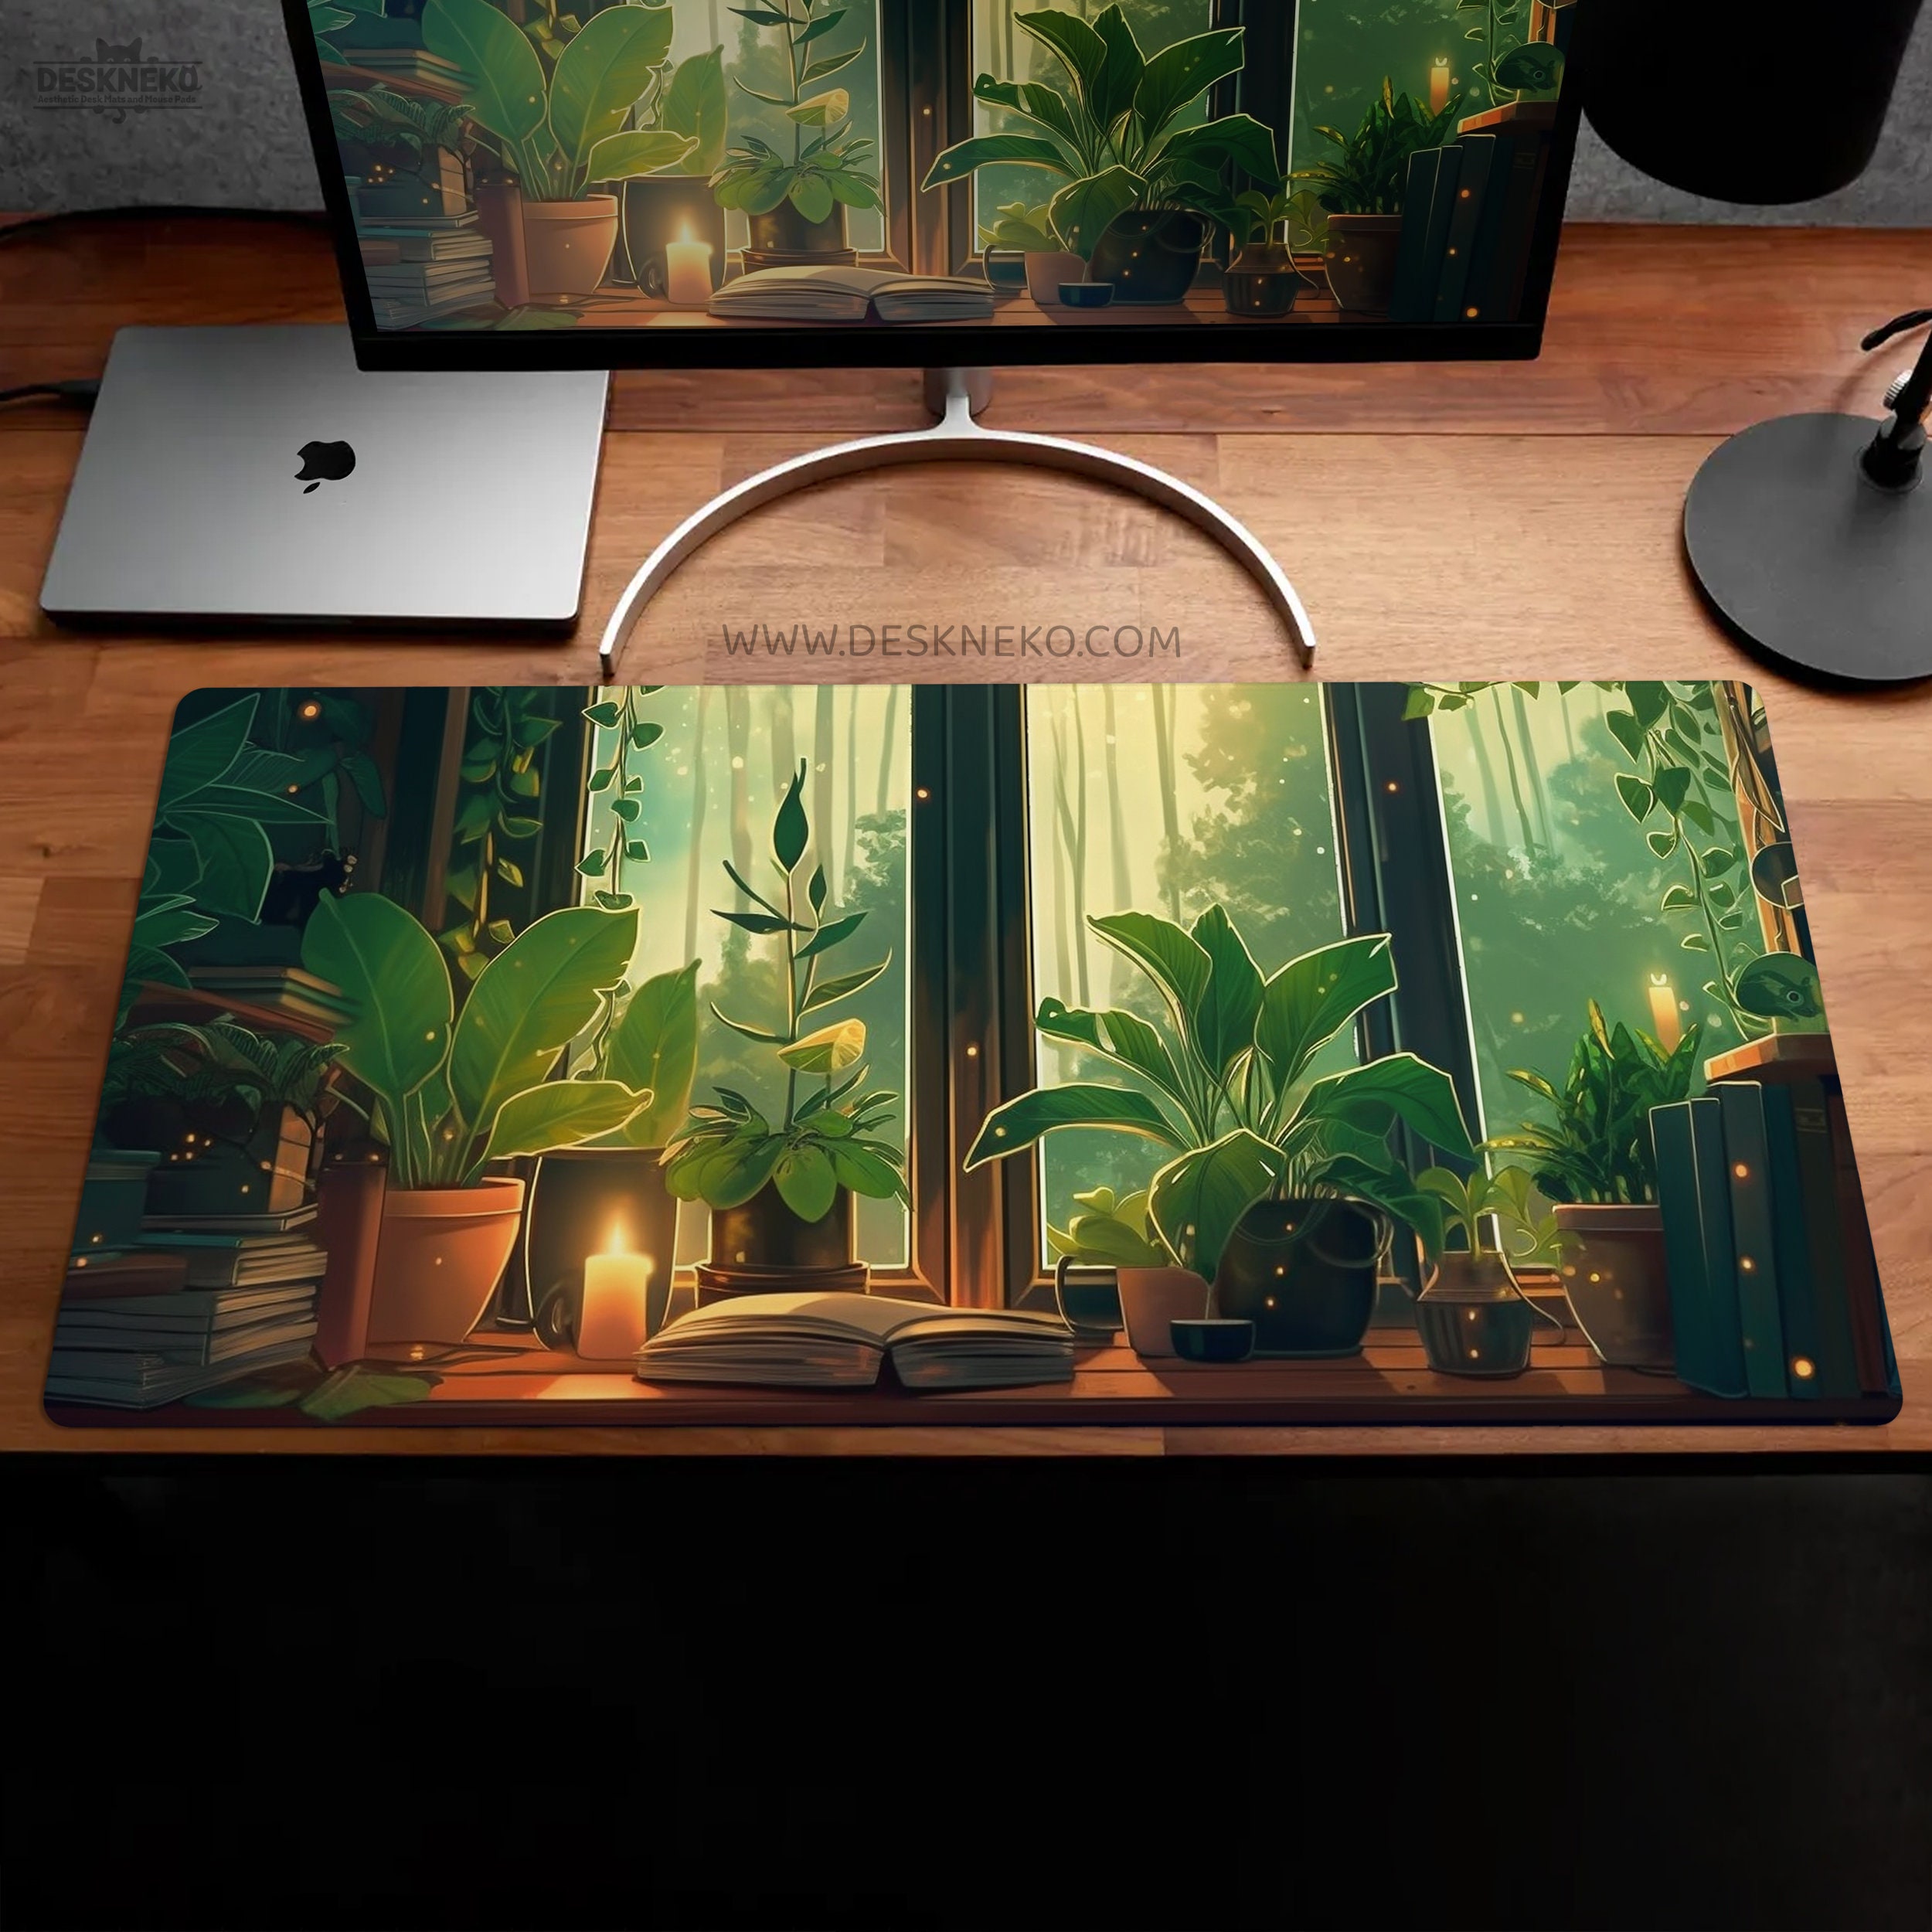 Bills Money Euro Gaming Mouse Pad Rubber Stitched Edges Mousepad 31.5'' X  11.8'' - AliExpress